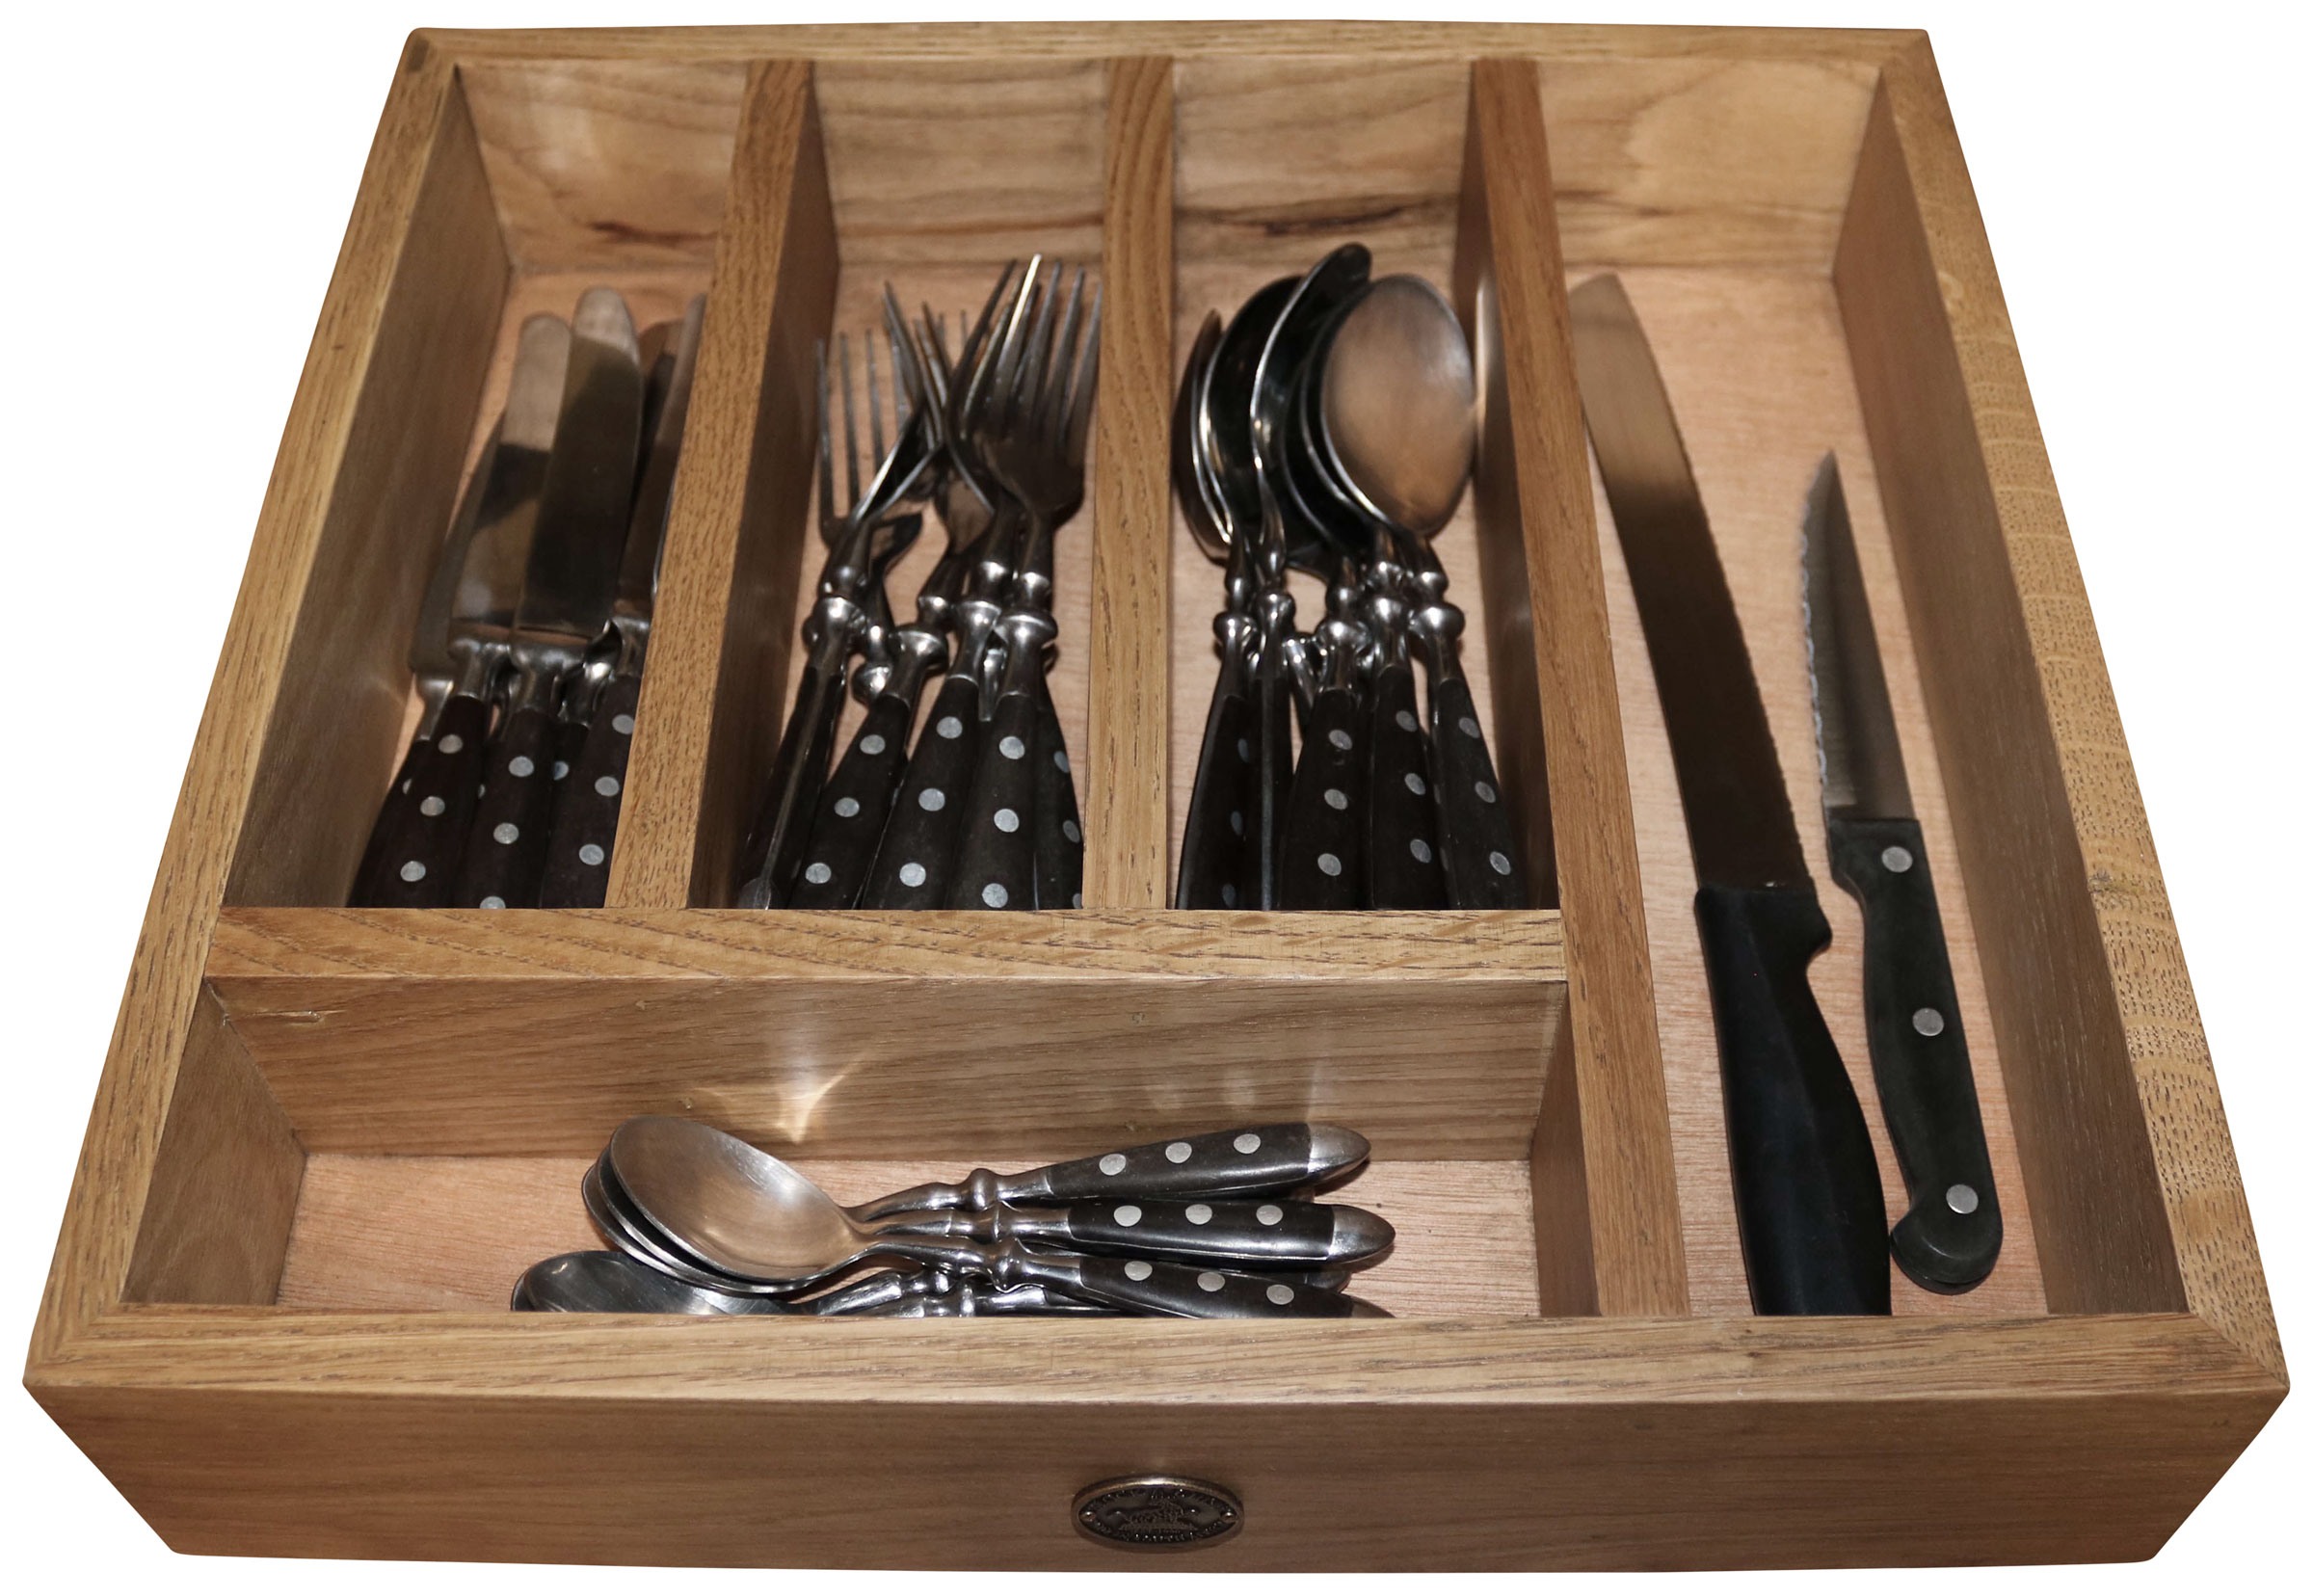 Block & Chisel solid weathered oak cutlery tray